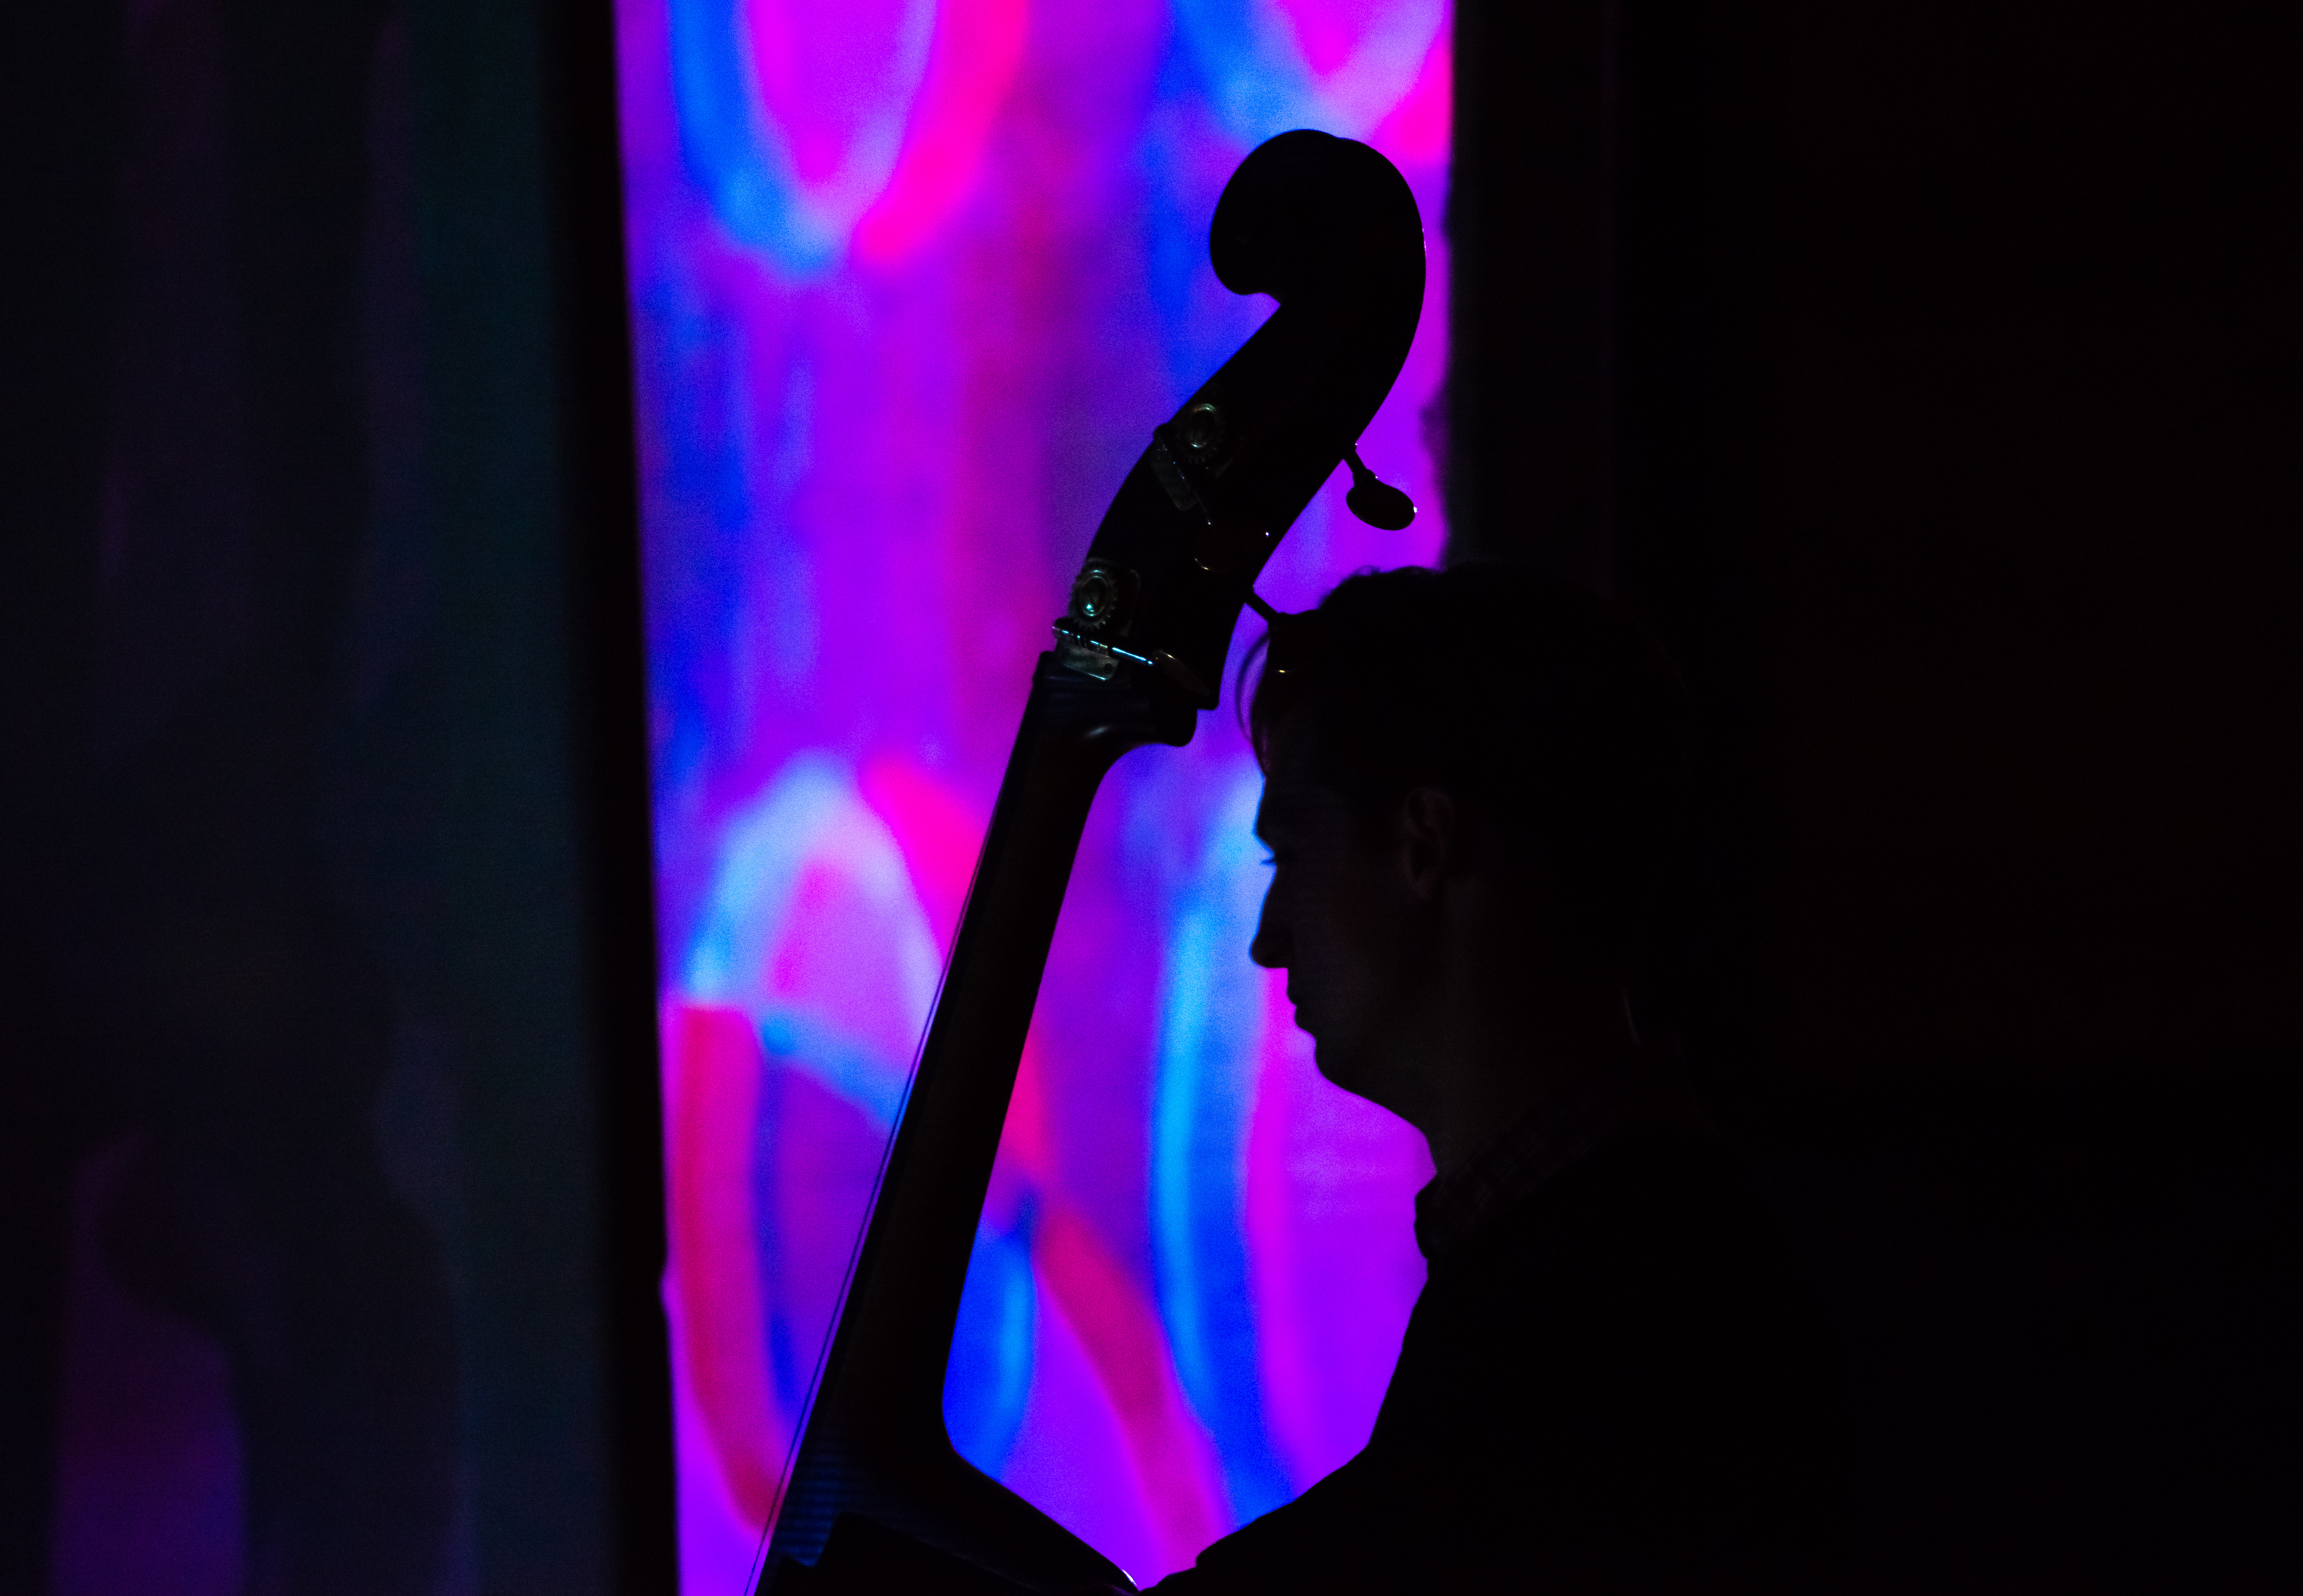 Student with cello backlit by purple and blue projection